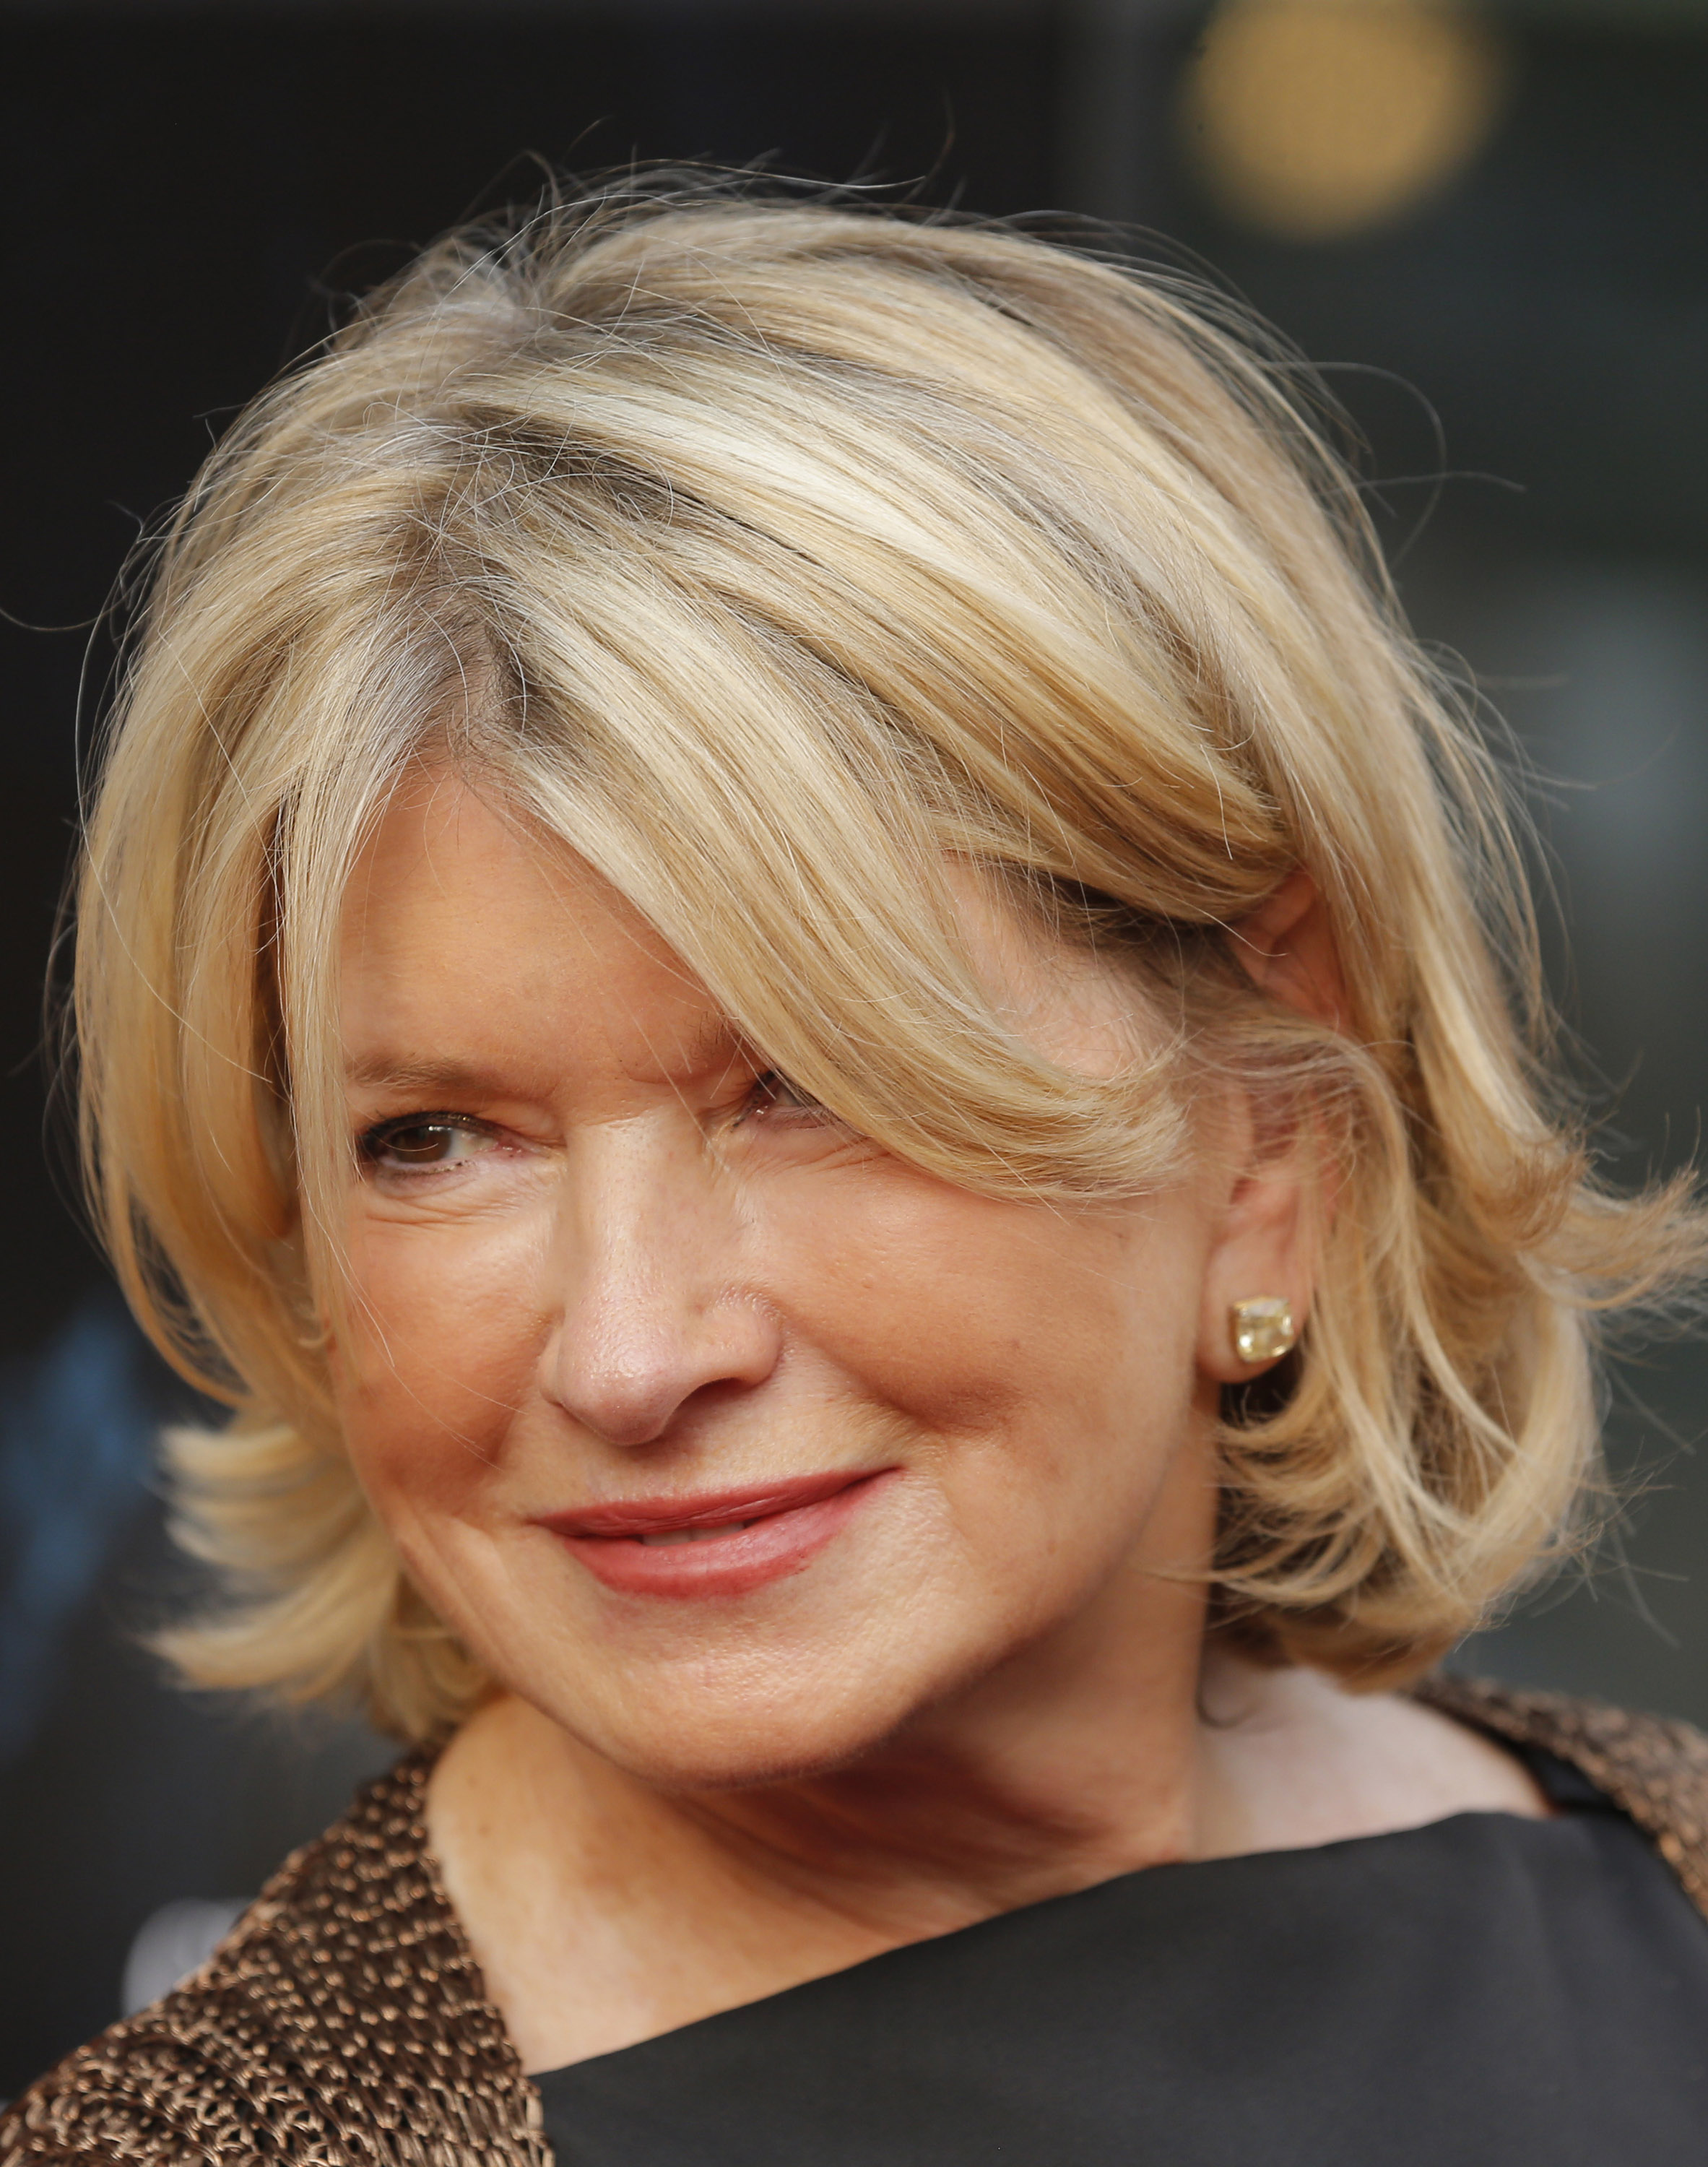 Martha Stewart attends the "Get On Up" premiere at The Apollo Theater on July 21, 2014 in New York City. (Jemal Countess—Getty Images)